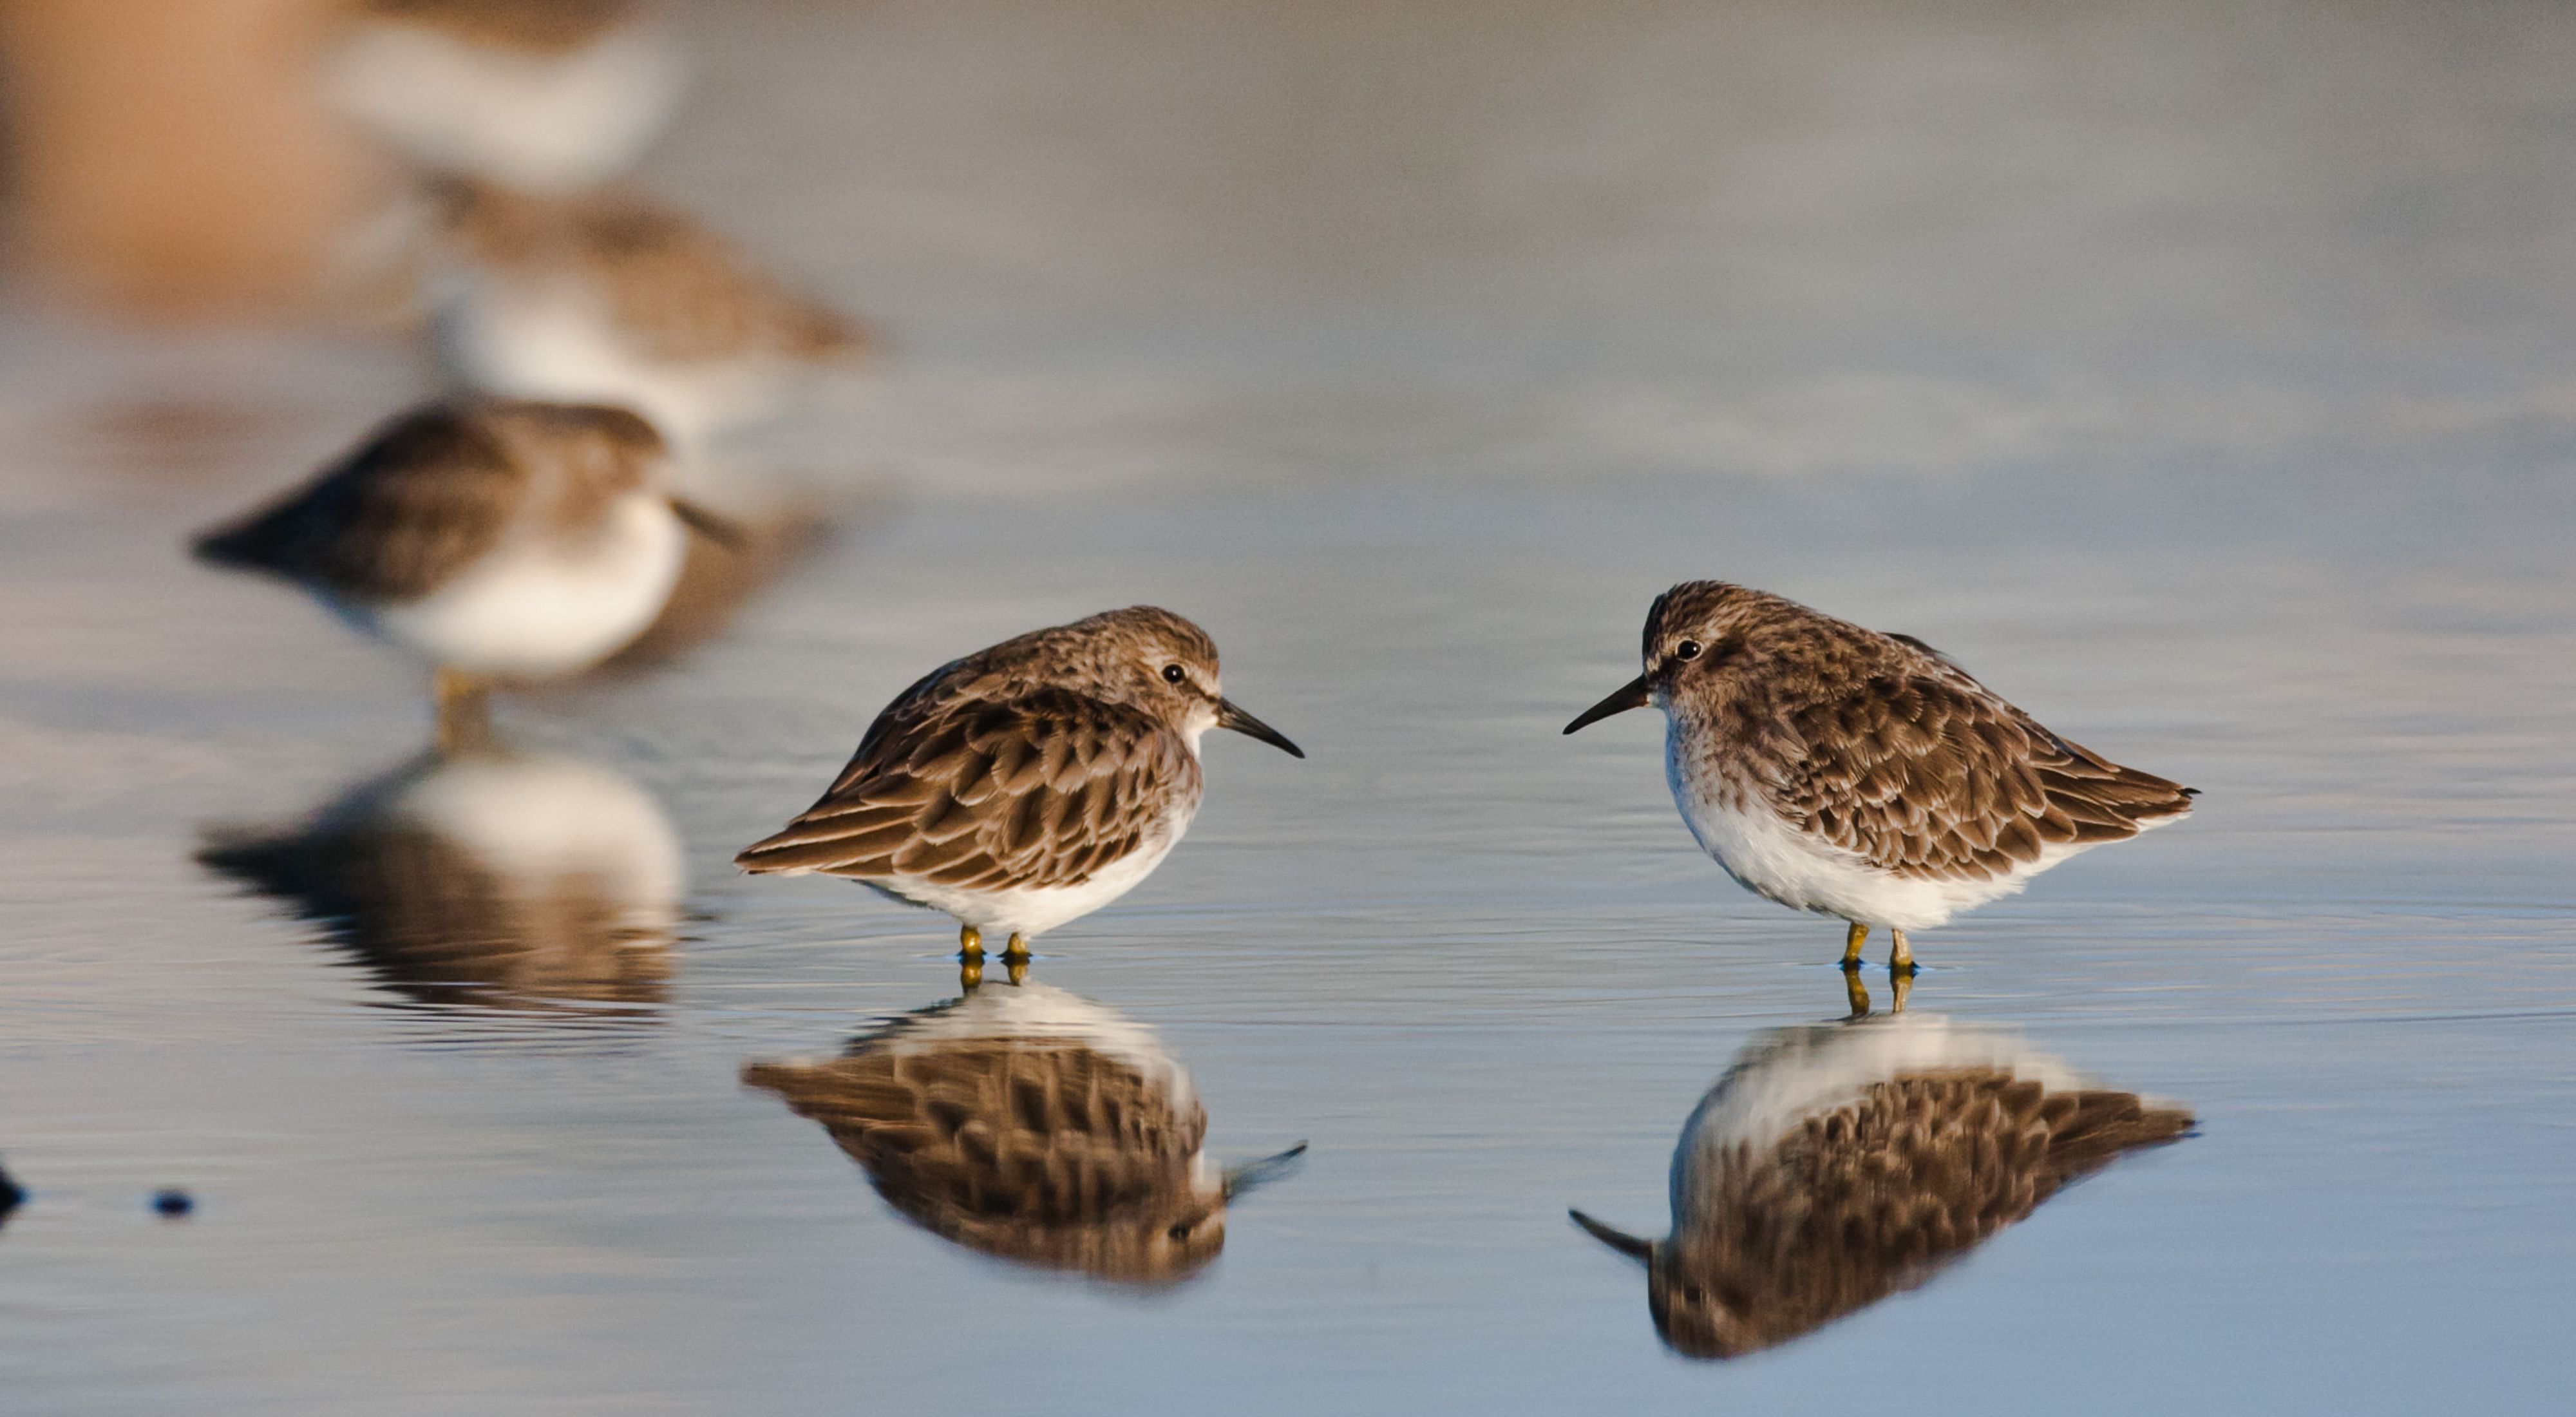 Two Least Sandpipers wade in shallow waters